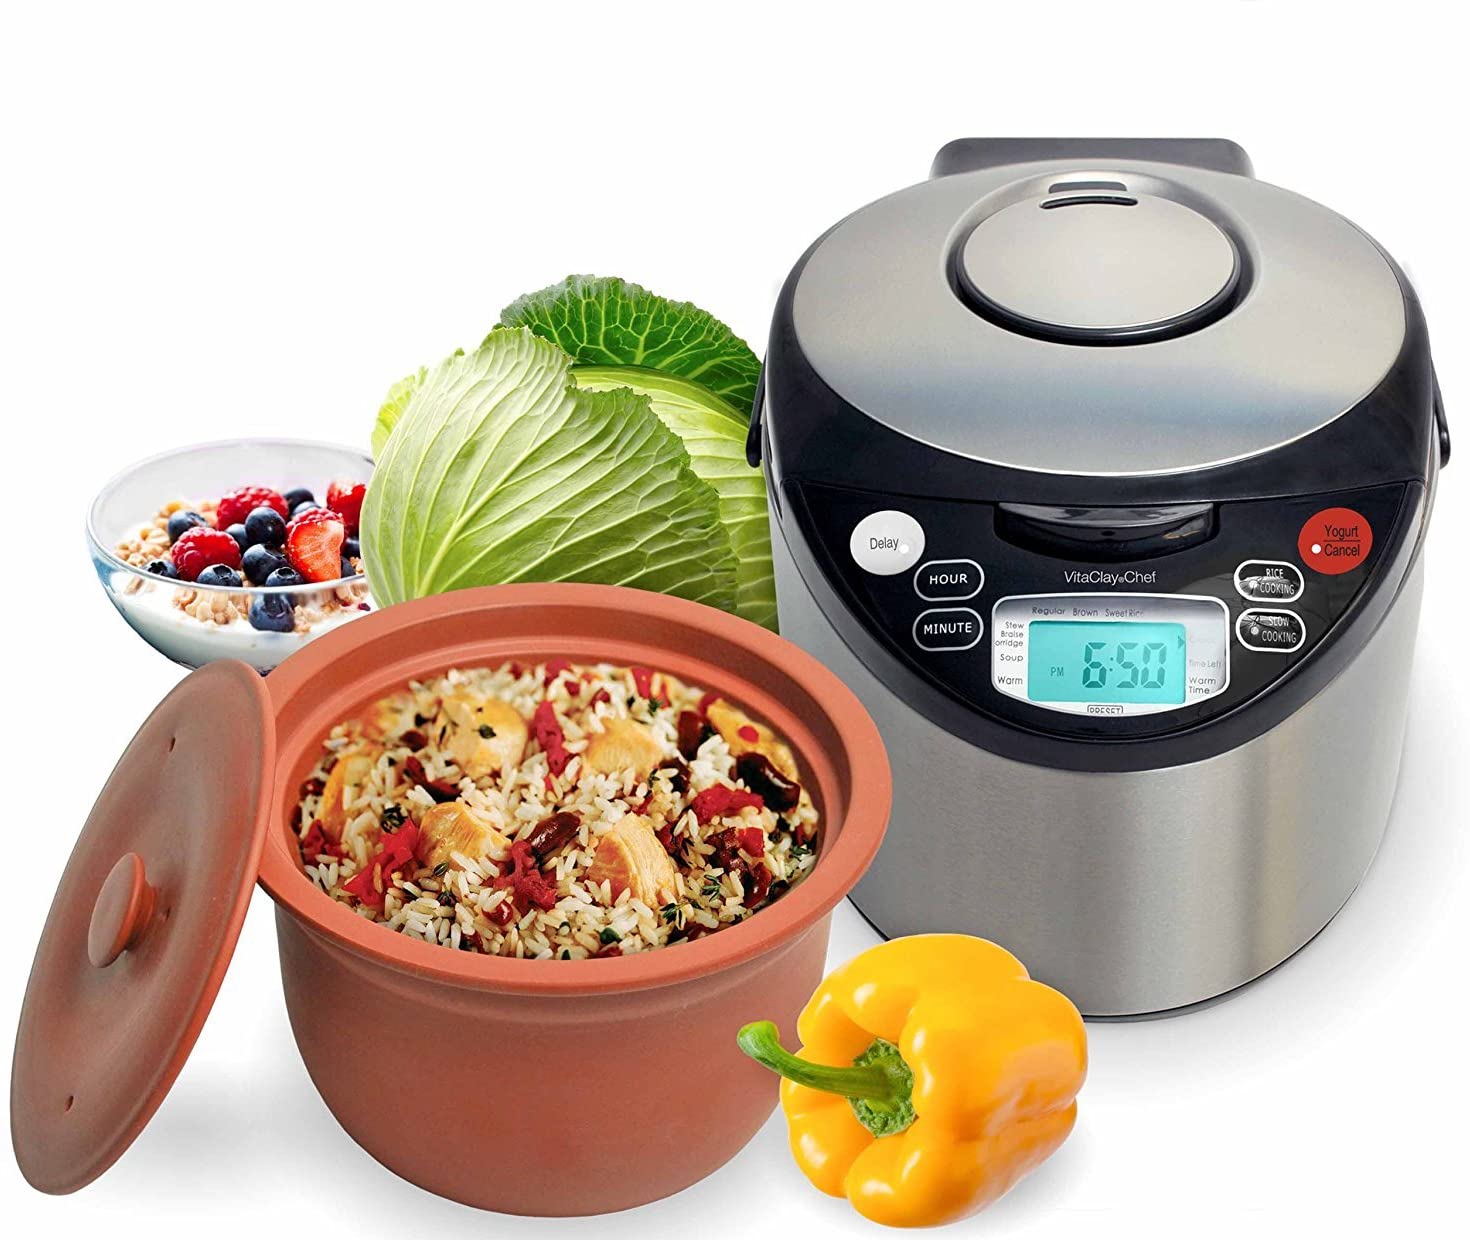 Smart Cooking with Vitaclay Organic Multi-Cooker - Safe & Non Toxic, pictured with a completed rice dish as well as assorted fruits and vegetables 